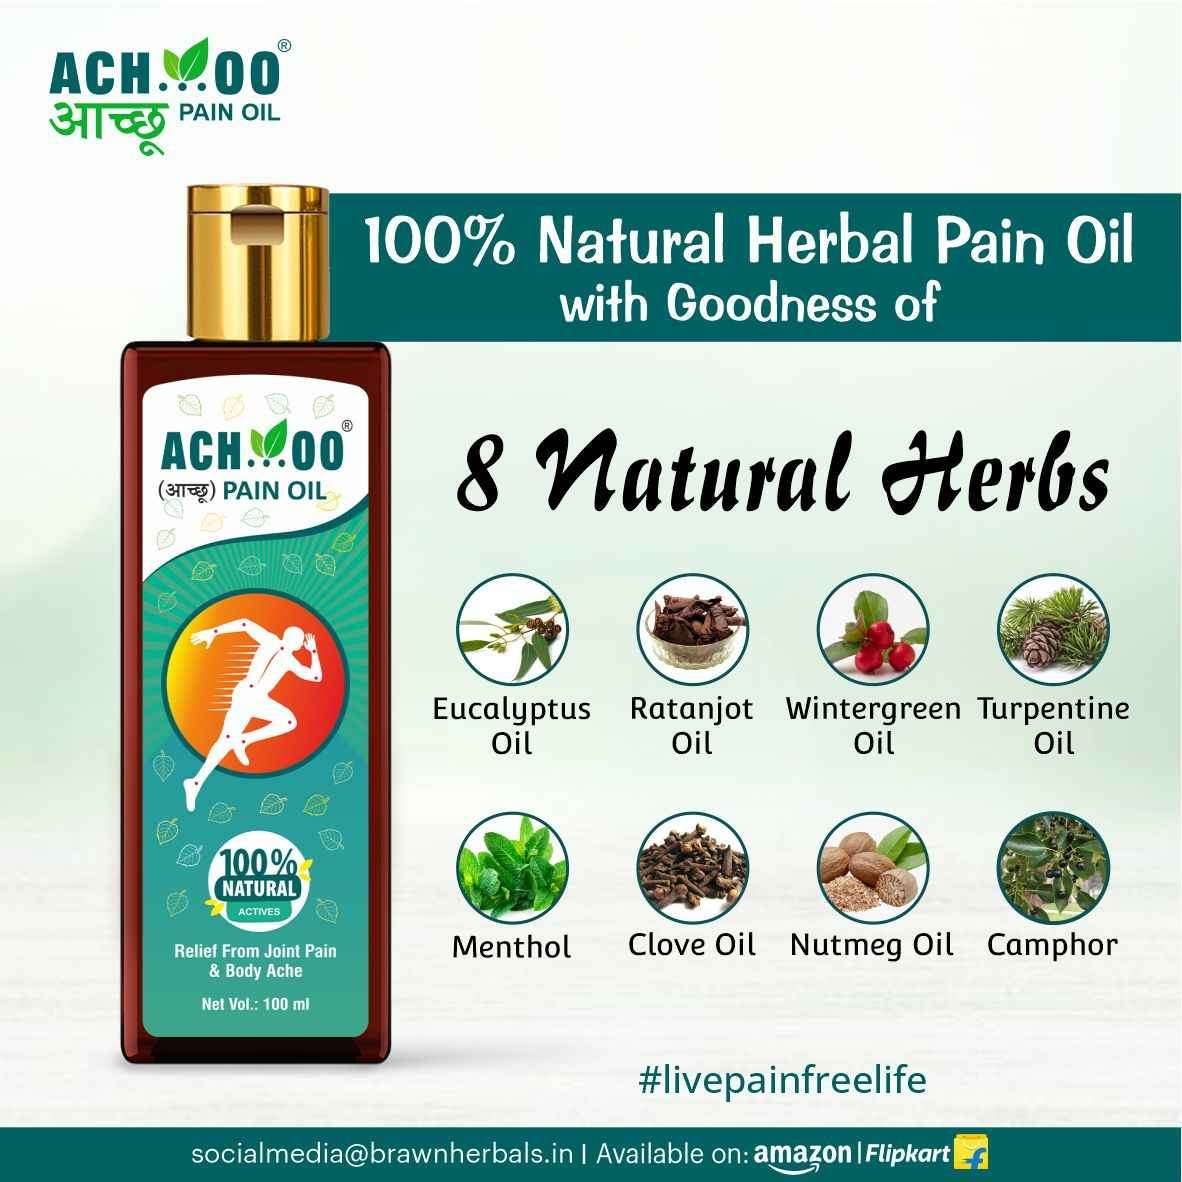 Achoo Pain Oil is fortified with 100% natural essential oil that has the therapeutic action of analgesic